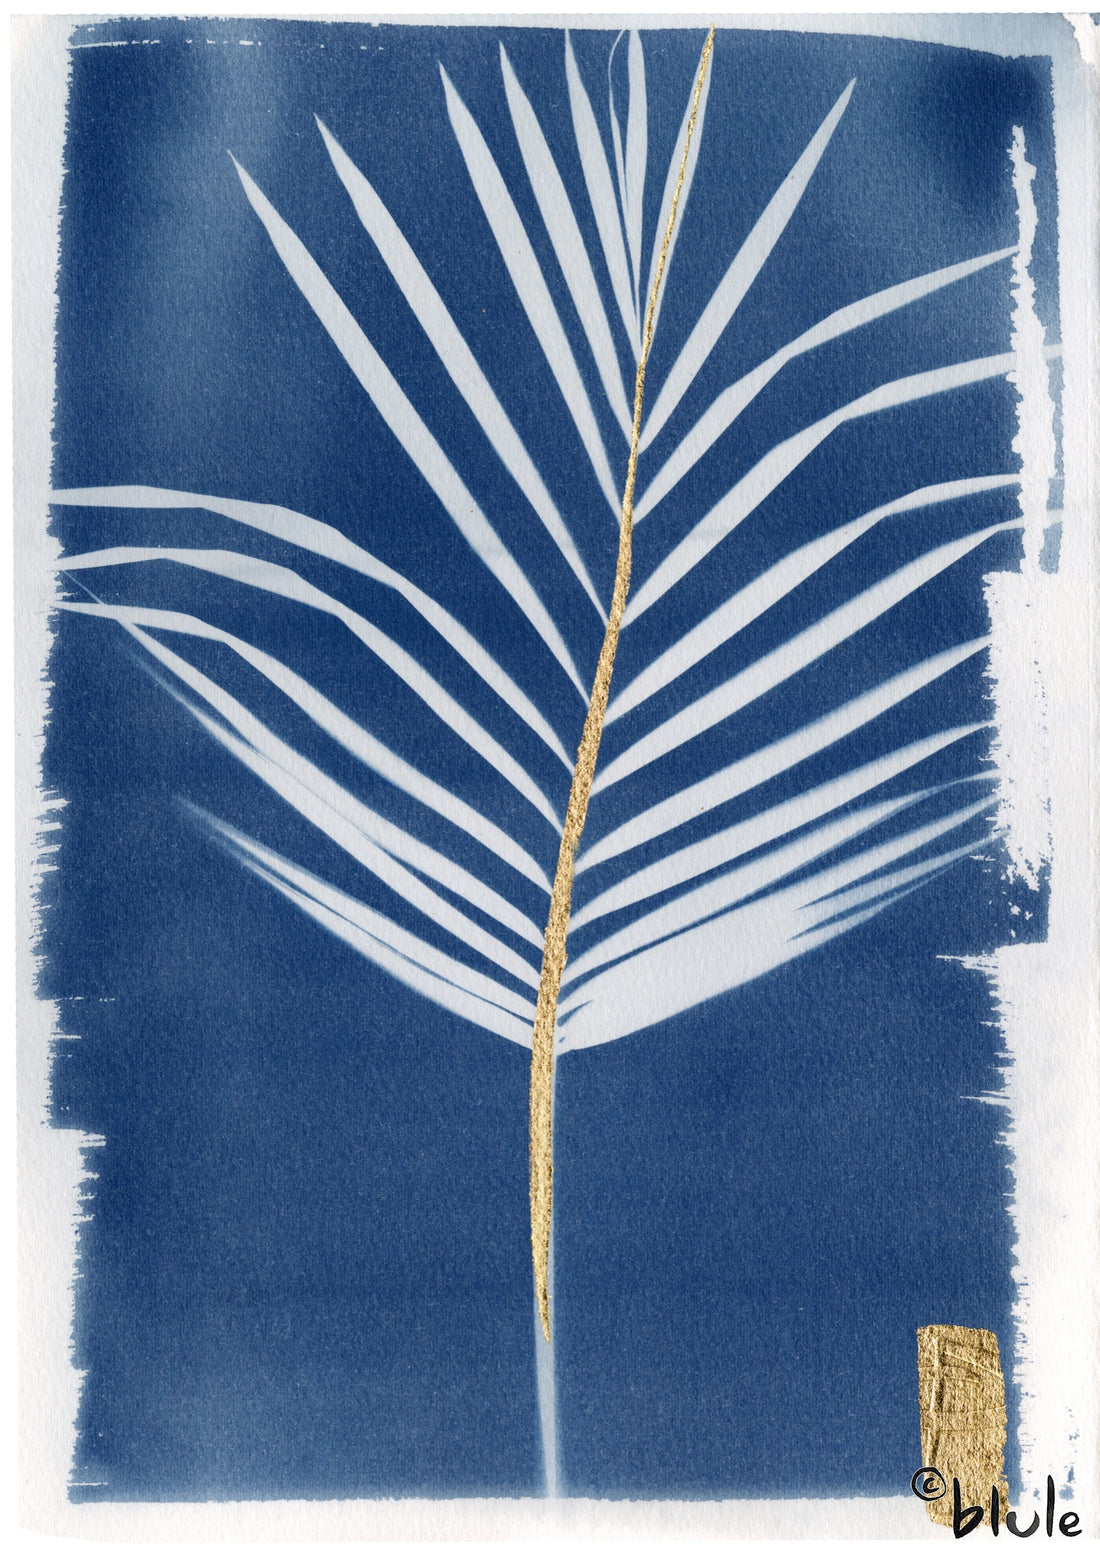 Botanical Series made with Cyanotype technique